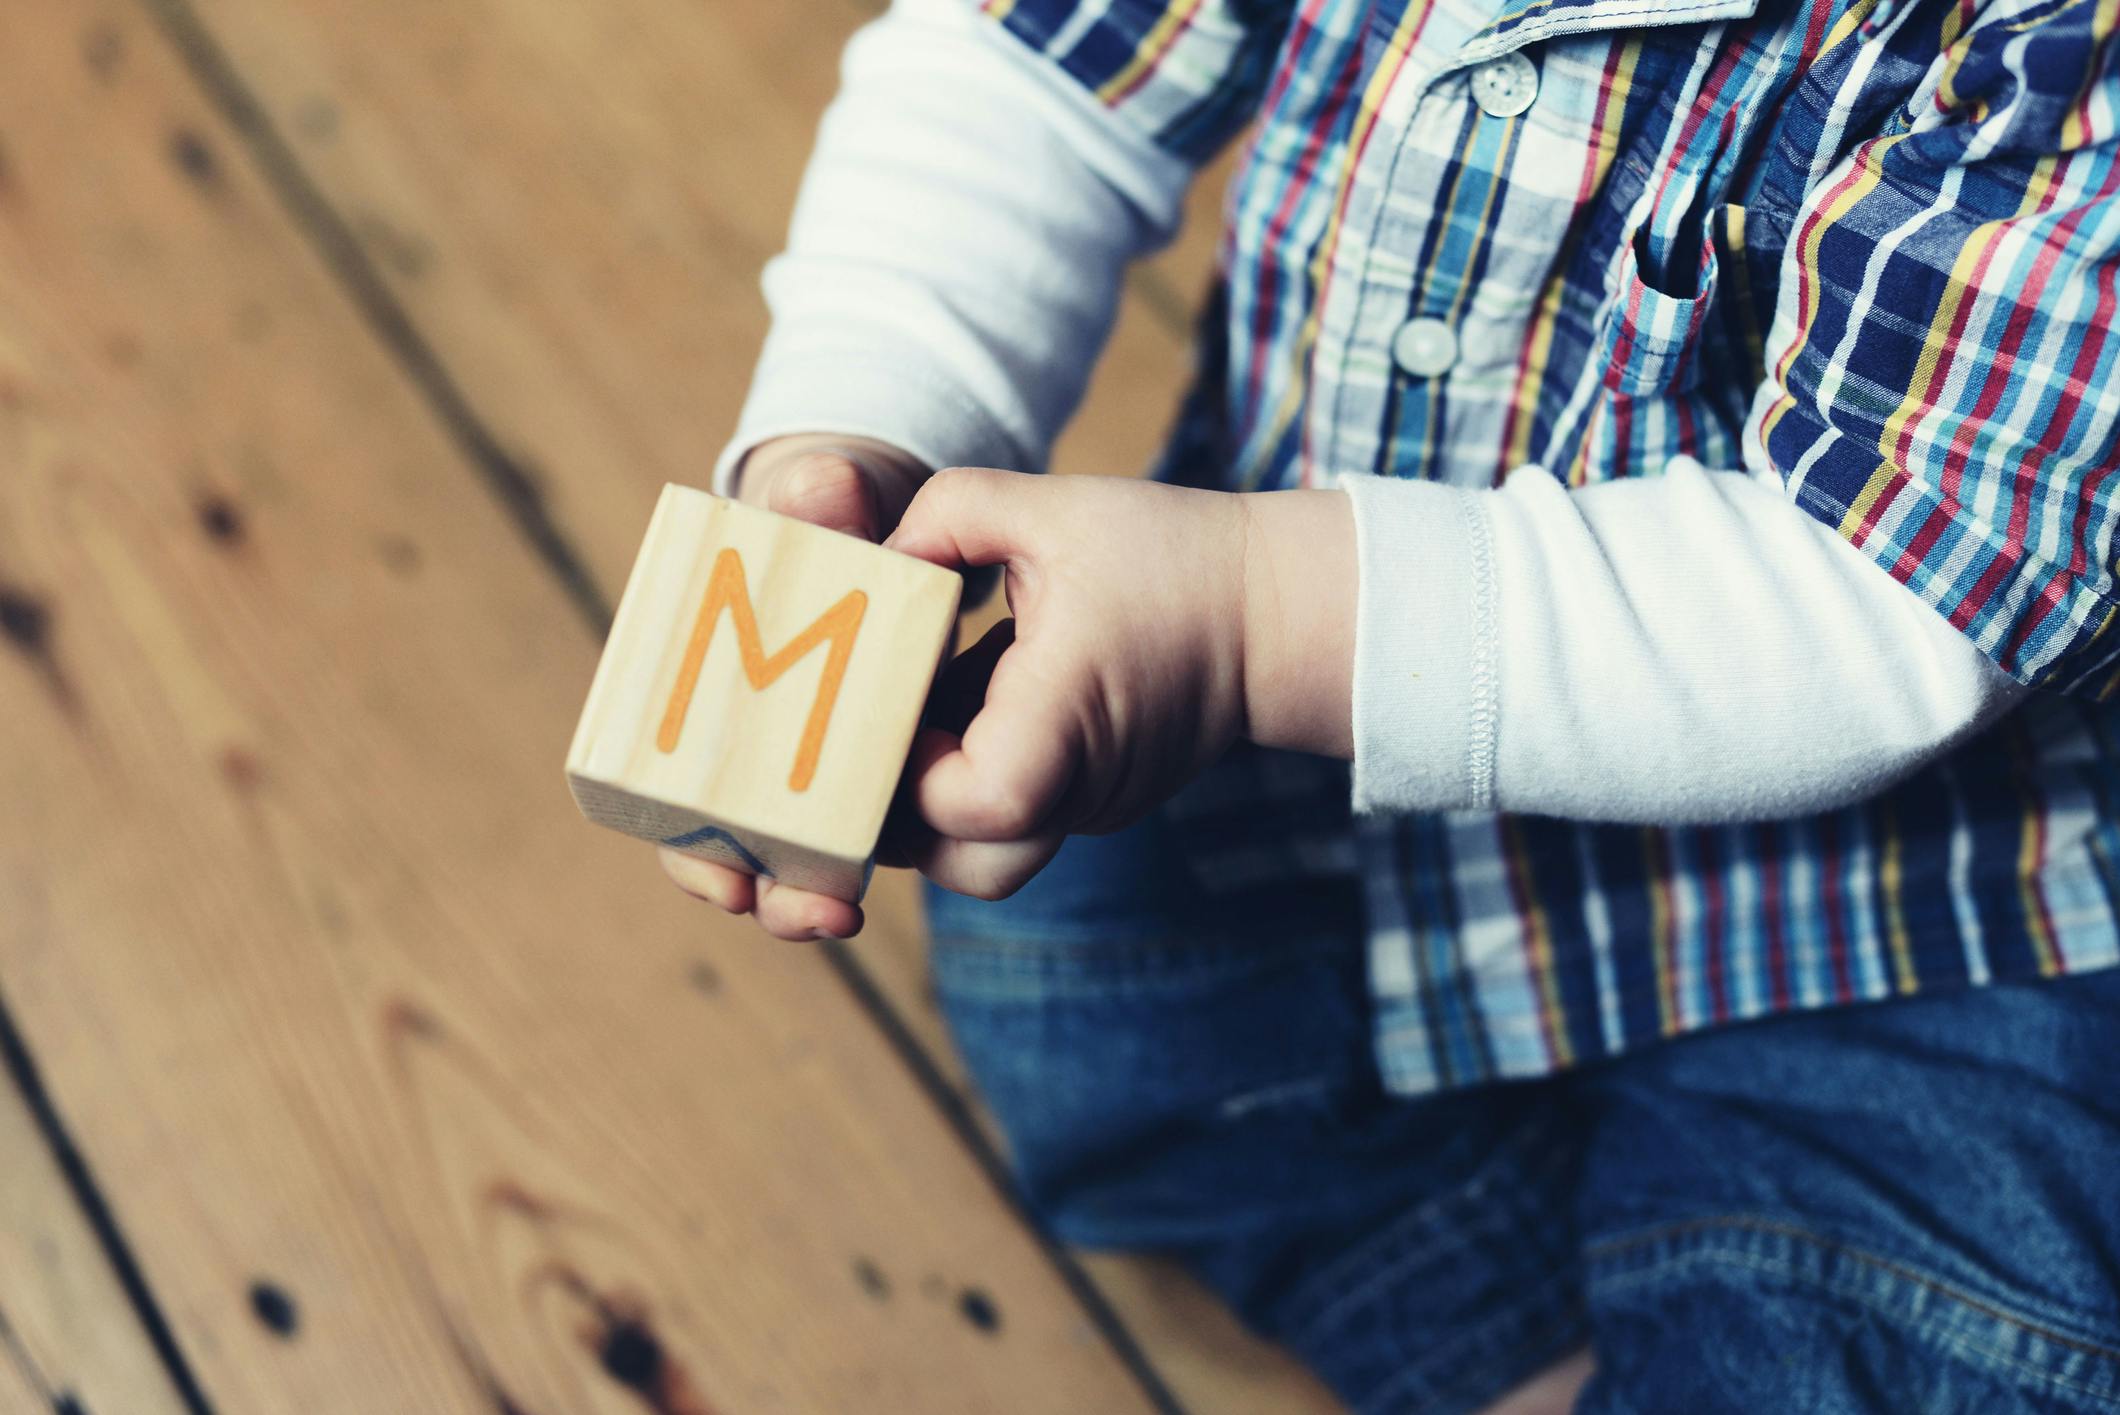 Boy Names That Start With M